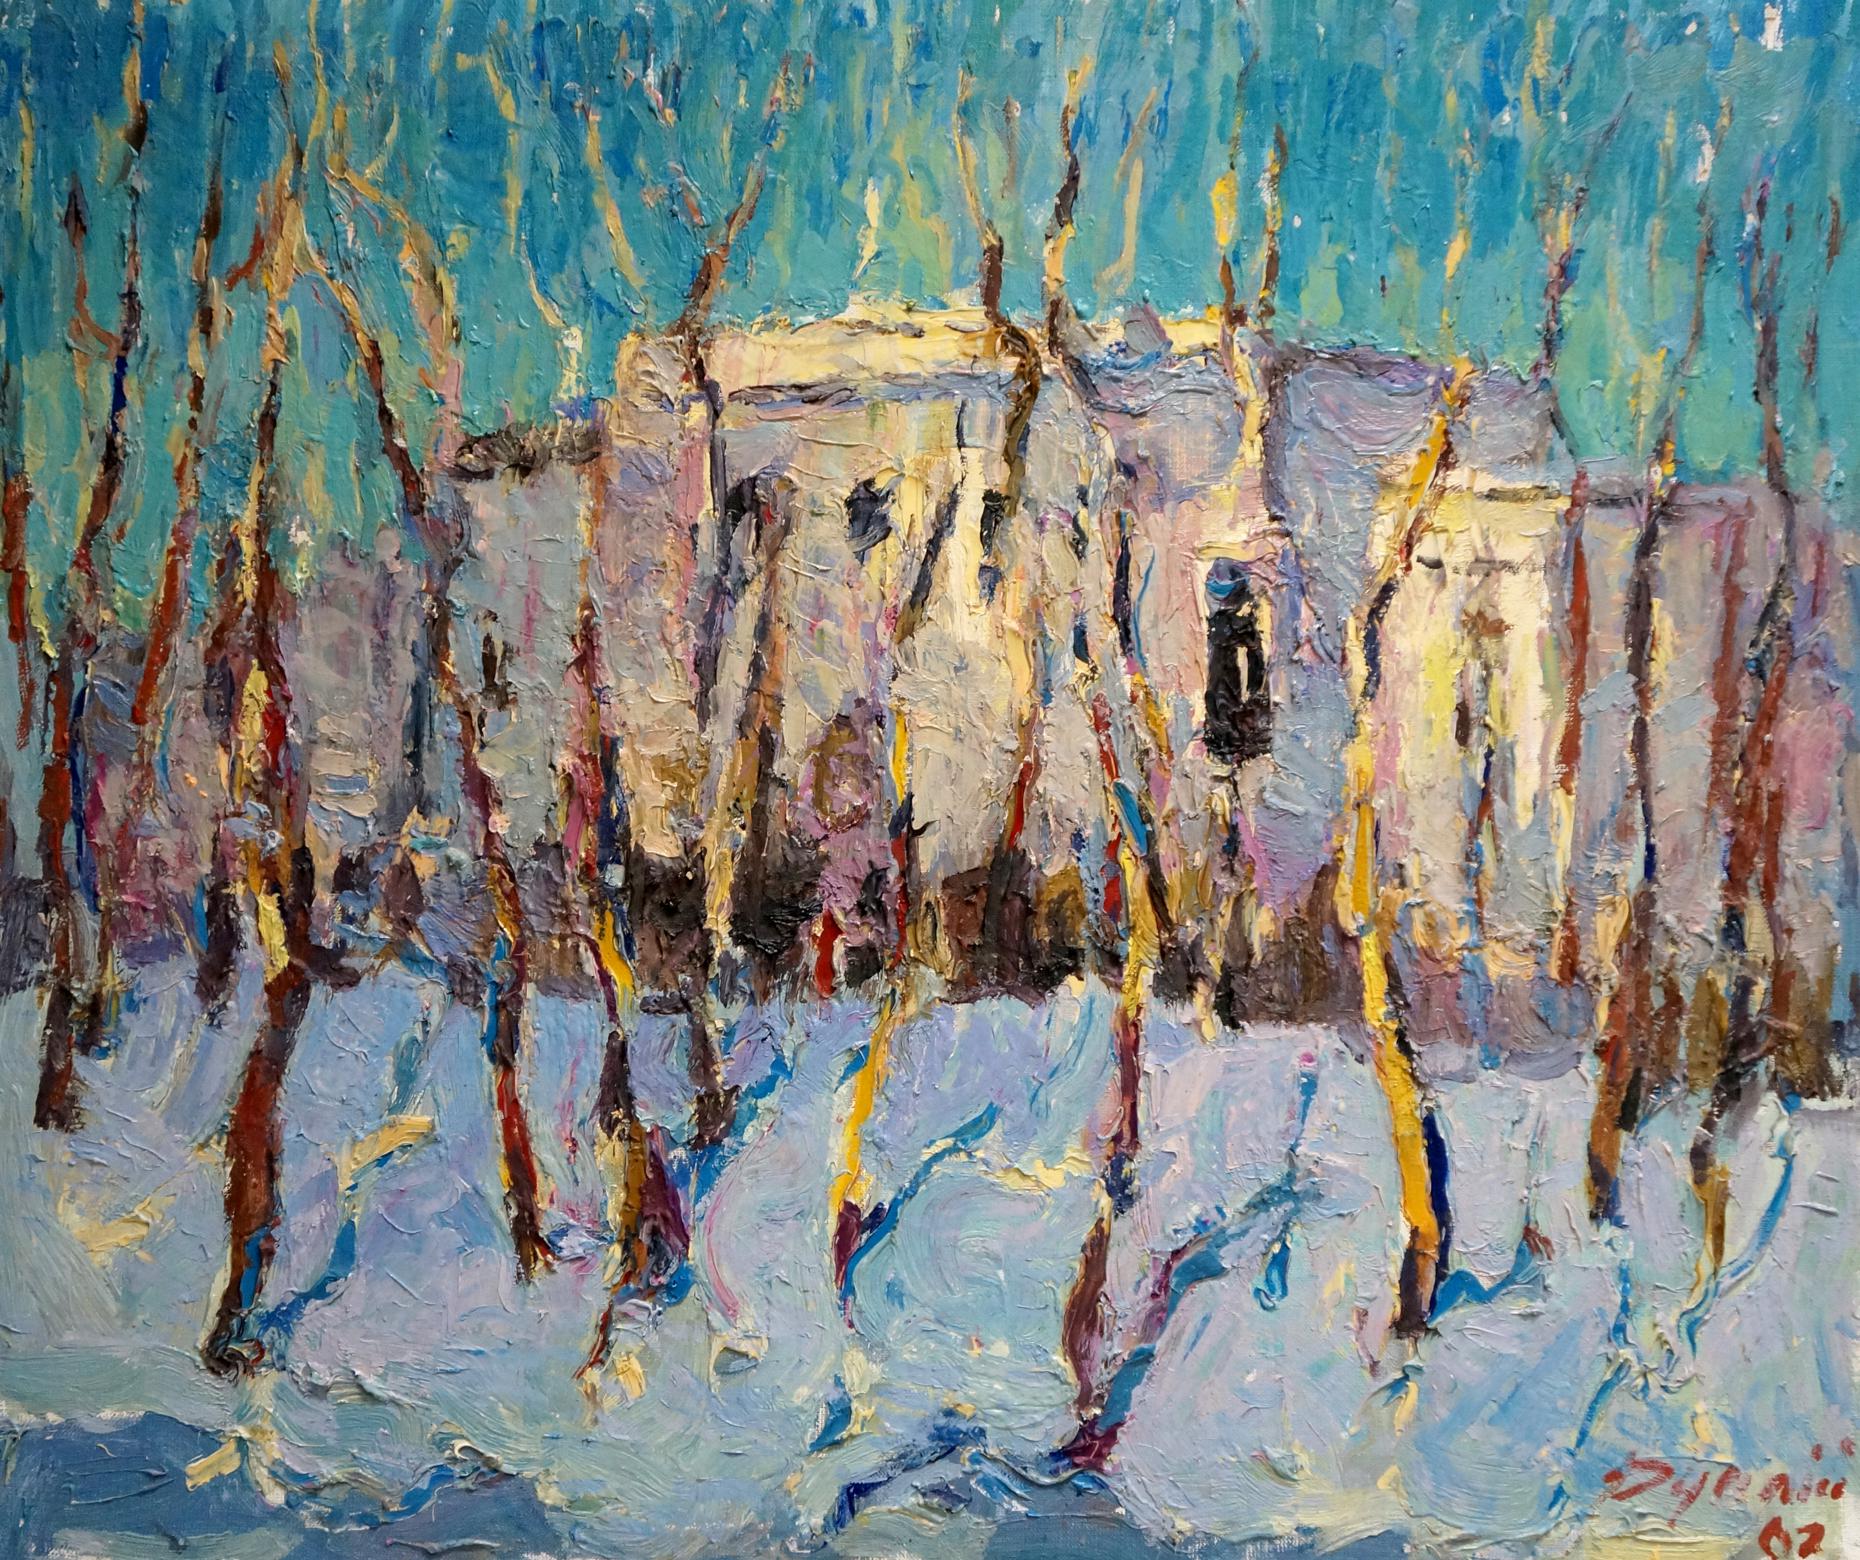 Oil painting The city behind the trees in winter Sergey Dupliy